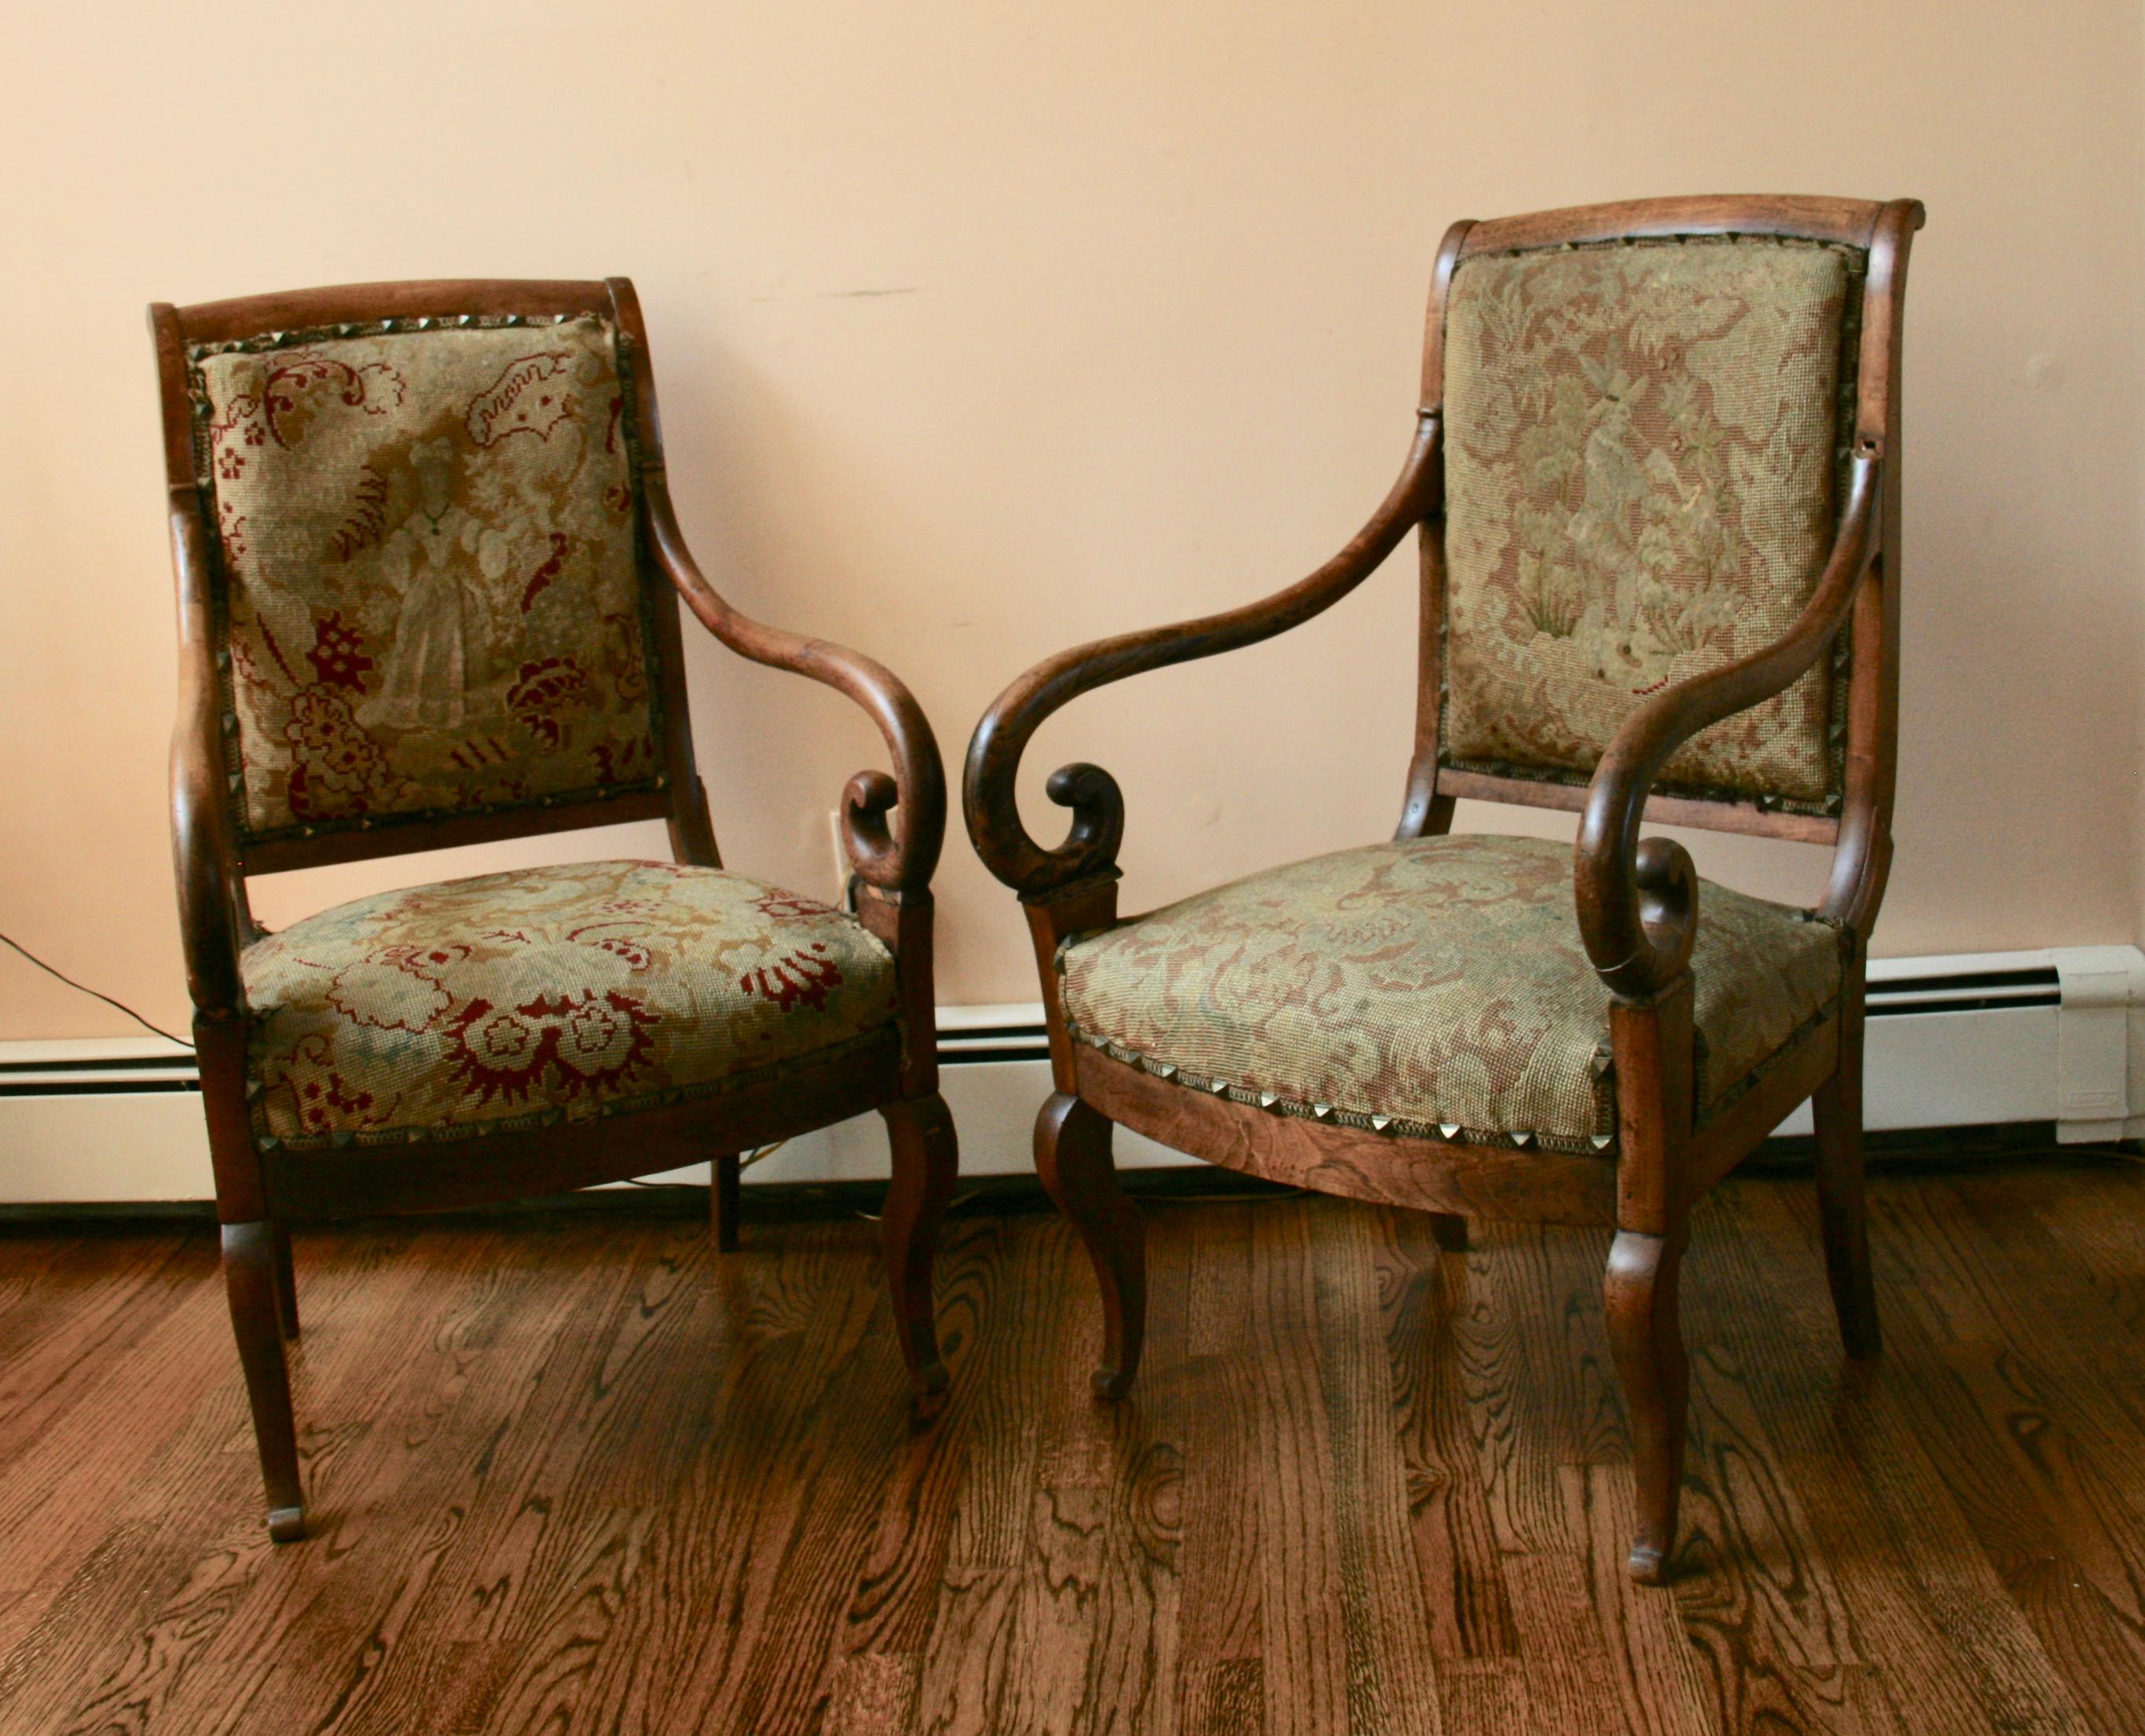 Pair of Italian fruitwood chairs, antique pair of beautifully curved fruitwood Italian with their original tapestry  upholstery. One chair presents more discoloration. Structurally sound, upholstery need restoration.
Repair to one arm
Missing small